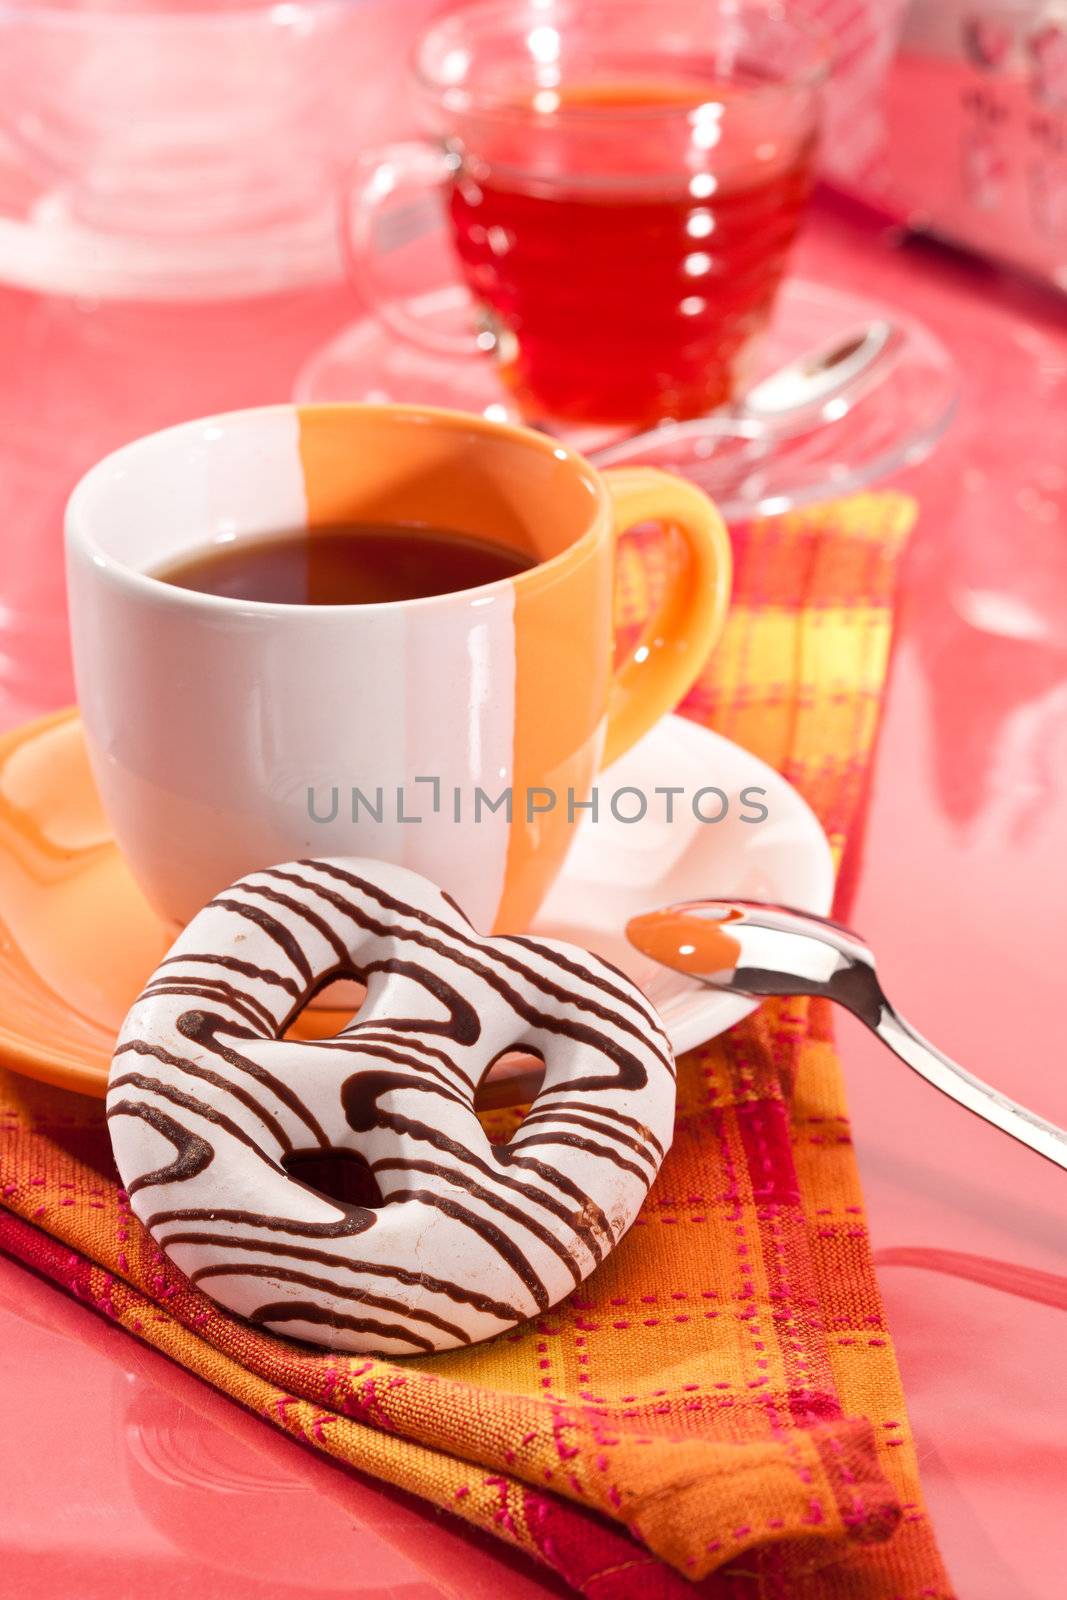 food series: cup of tea with chocolate iced gingerbread